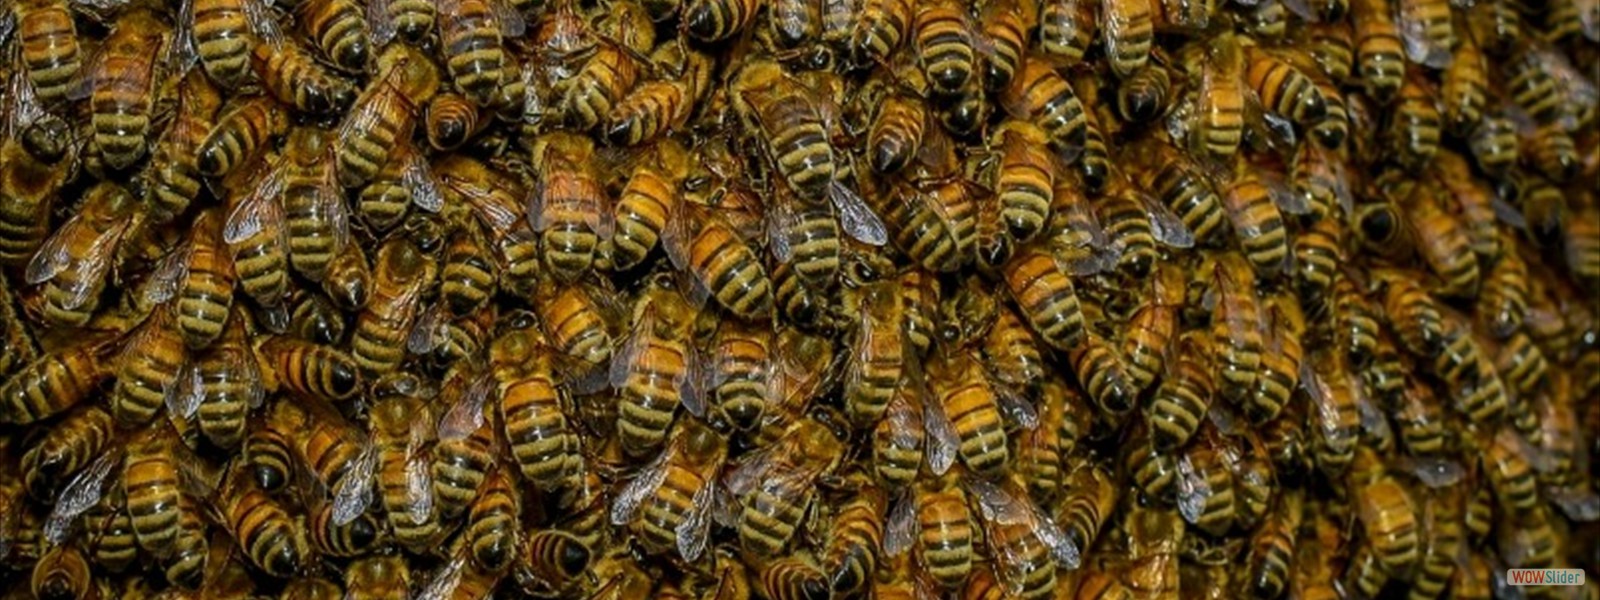 LIVE HONEYBEES, QUEENS, AND HIVES